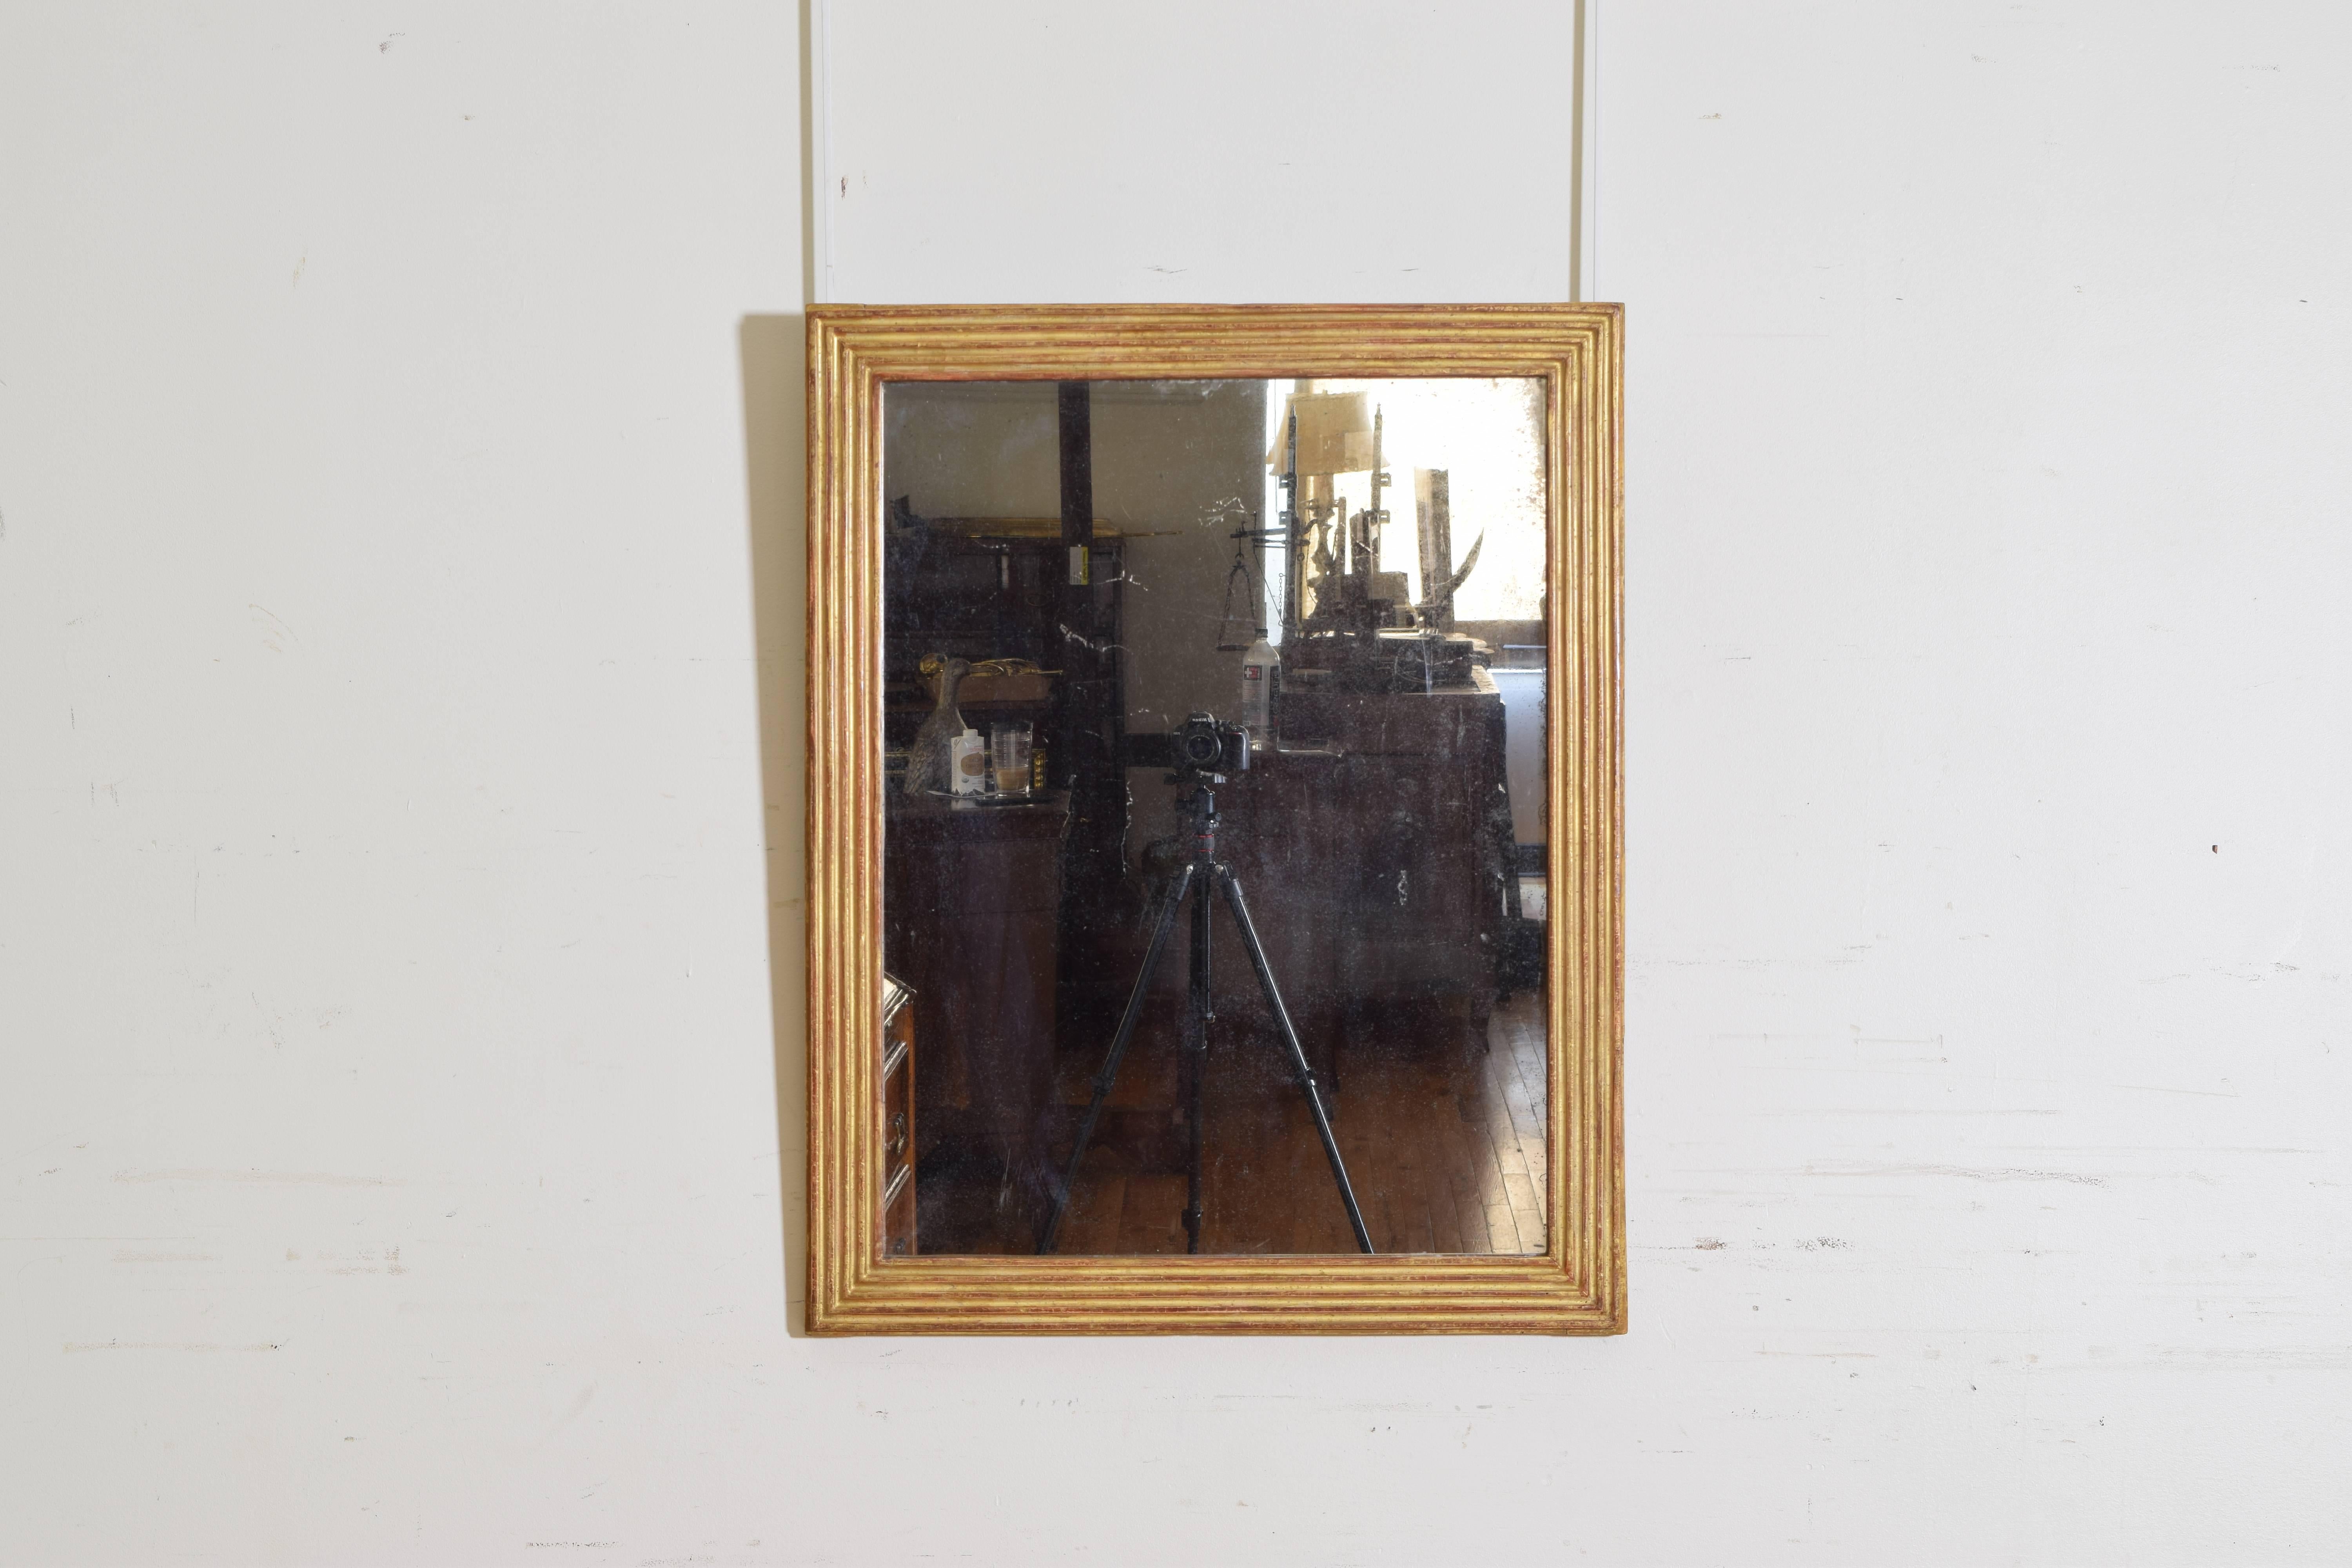 Dealers in Europe call these LXVI mirrors but I tend to date them later into the 19th century, circa 1820-1830, having fluted moldings and retaining original mirror plate.